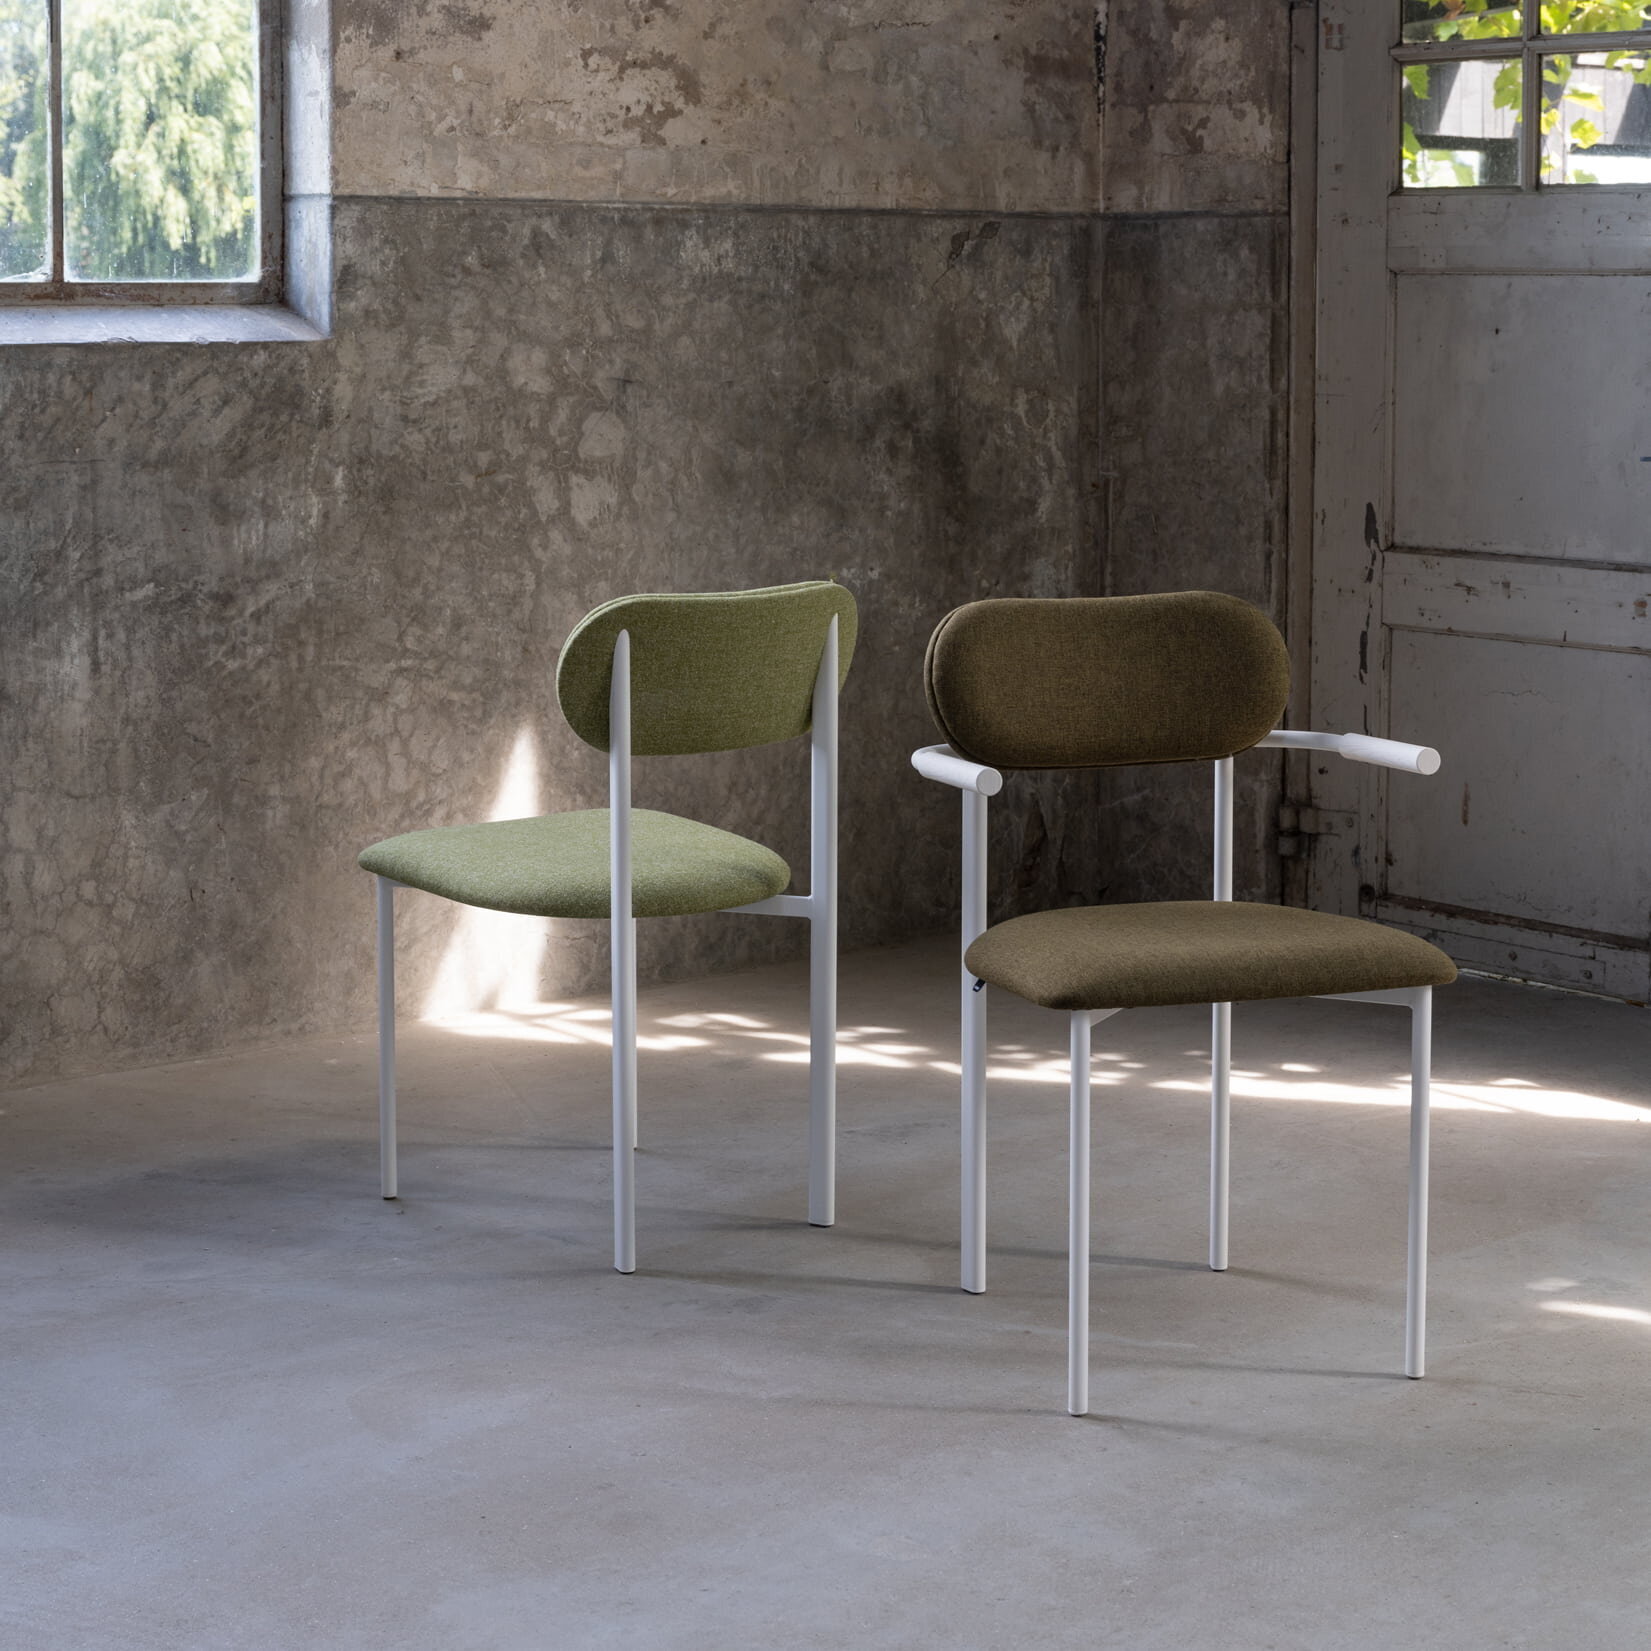 Design modern dining chair | Oblique Dining Chair Upholstered with Armrest Green soil army14 | Studio HENK| 